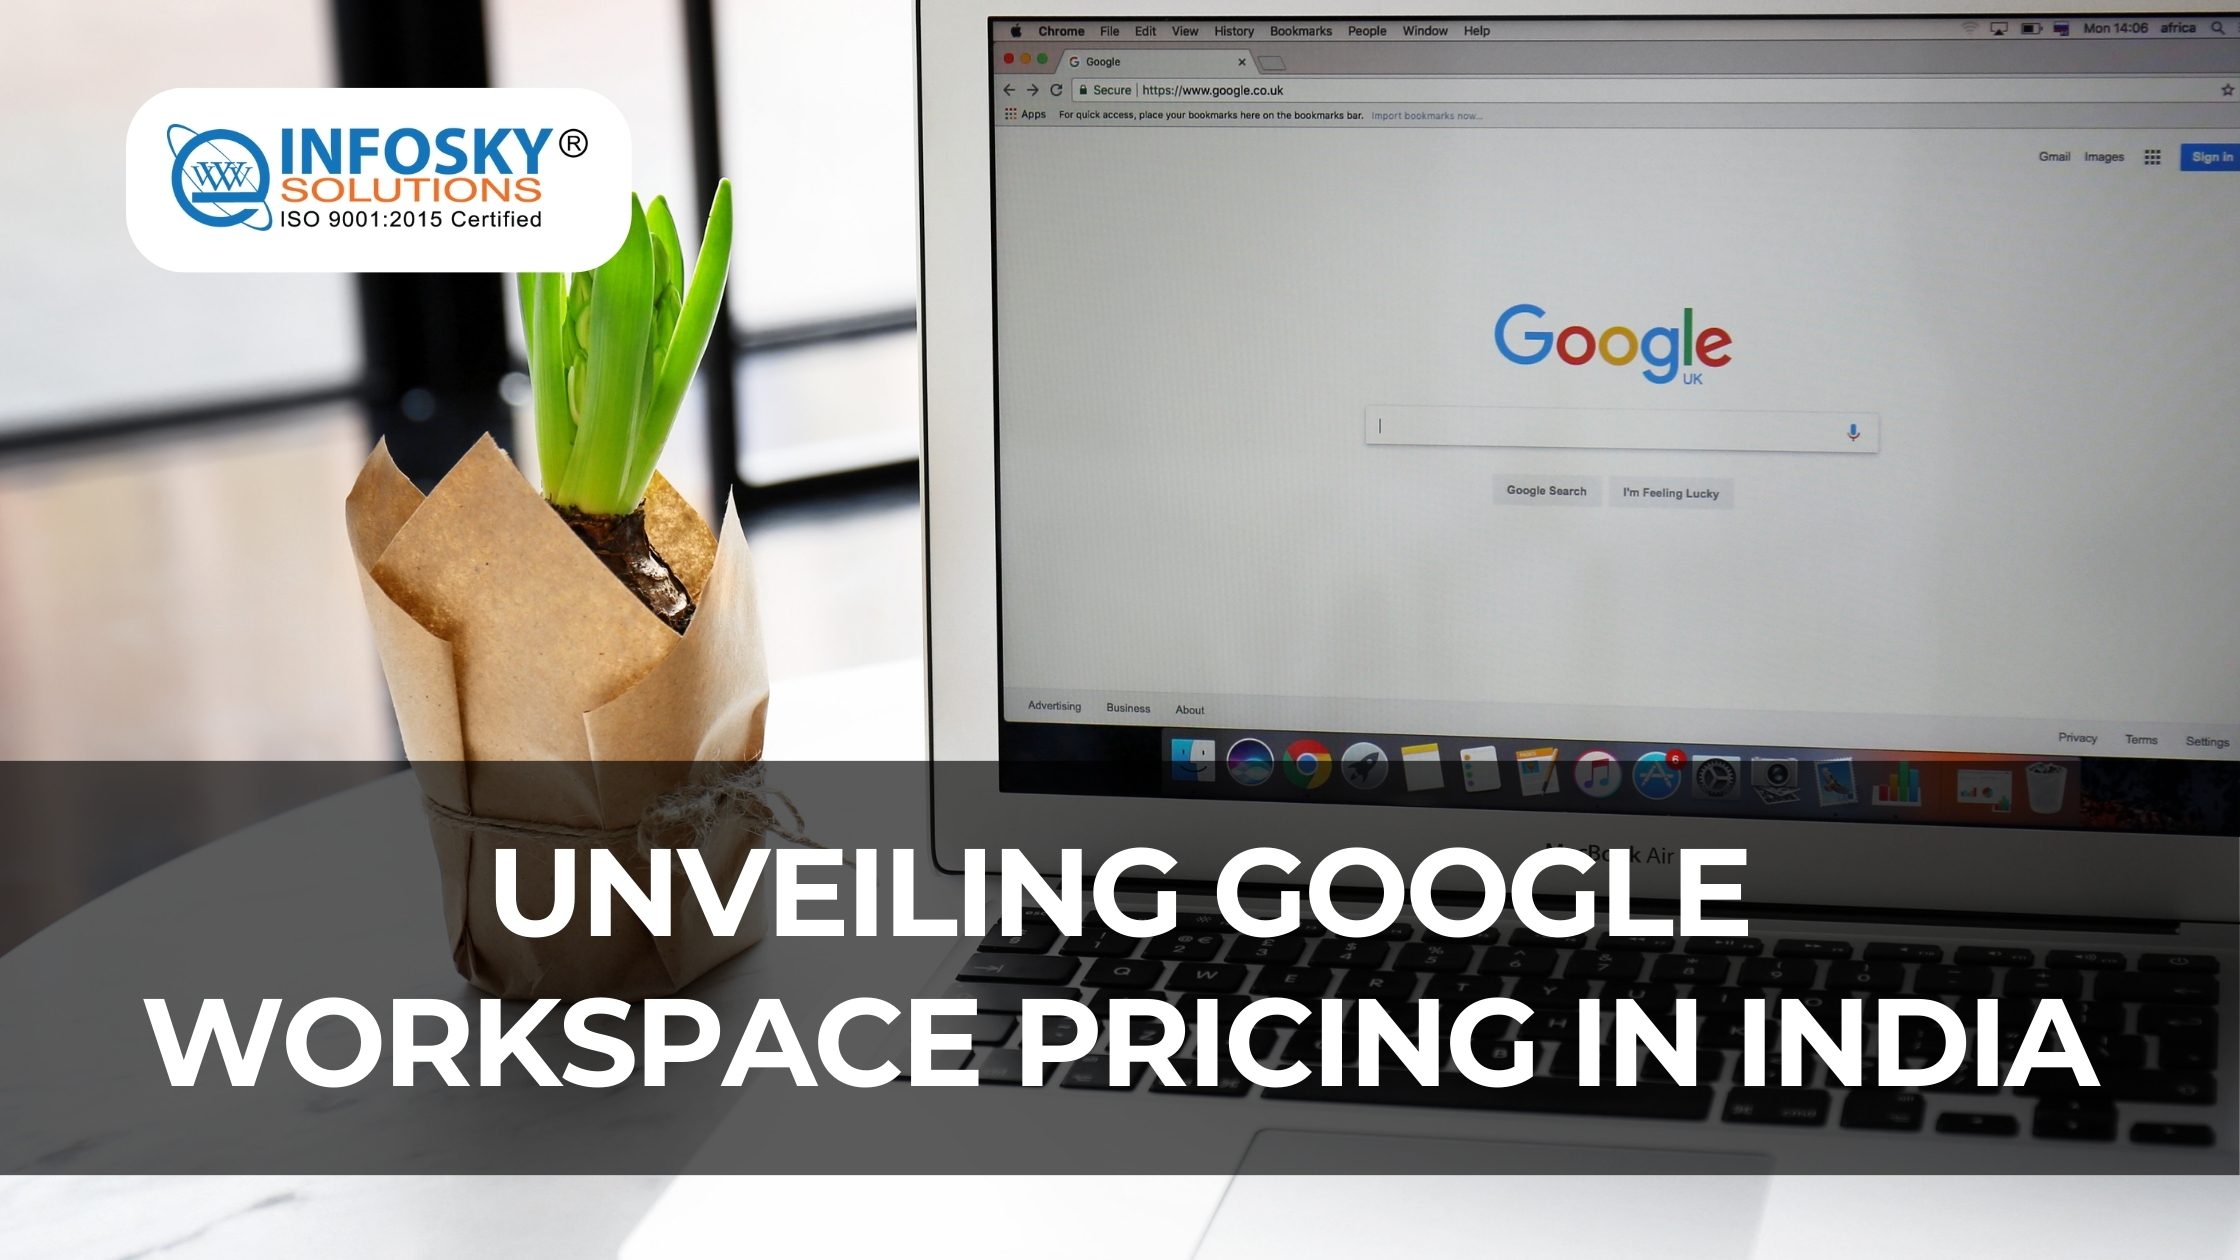 Unveiling Google Workspace Pricing in India - Infosky Solutions Blog